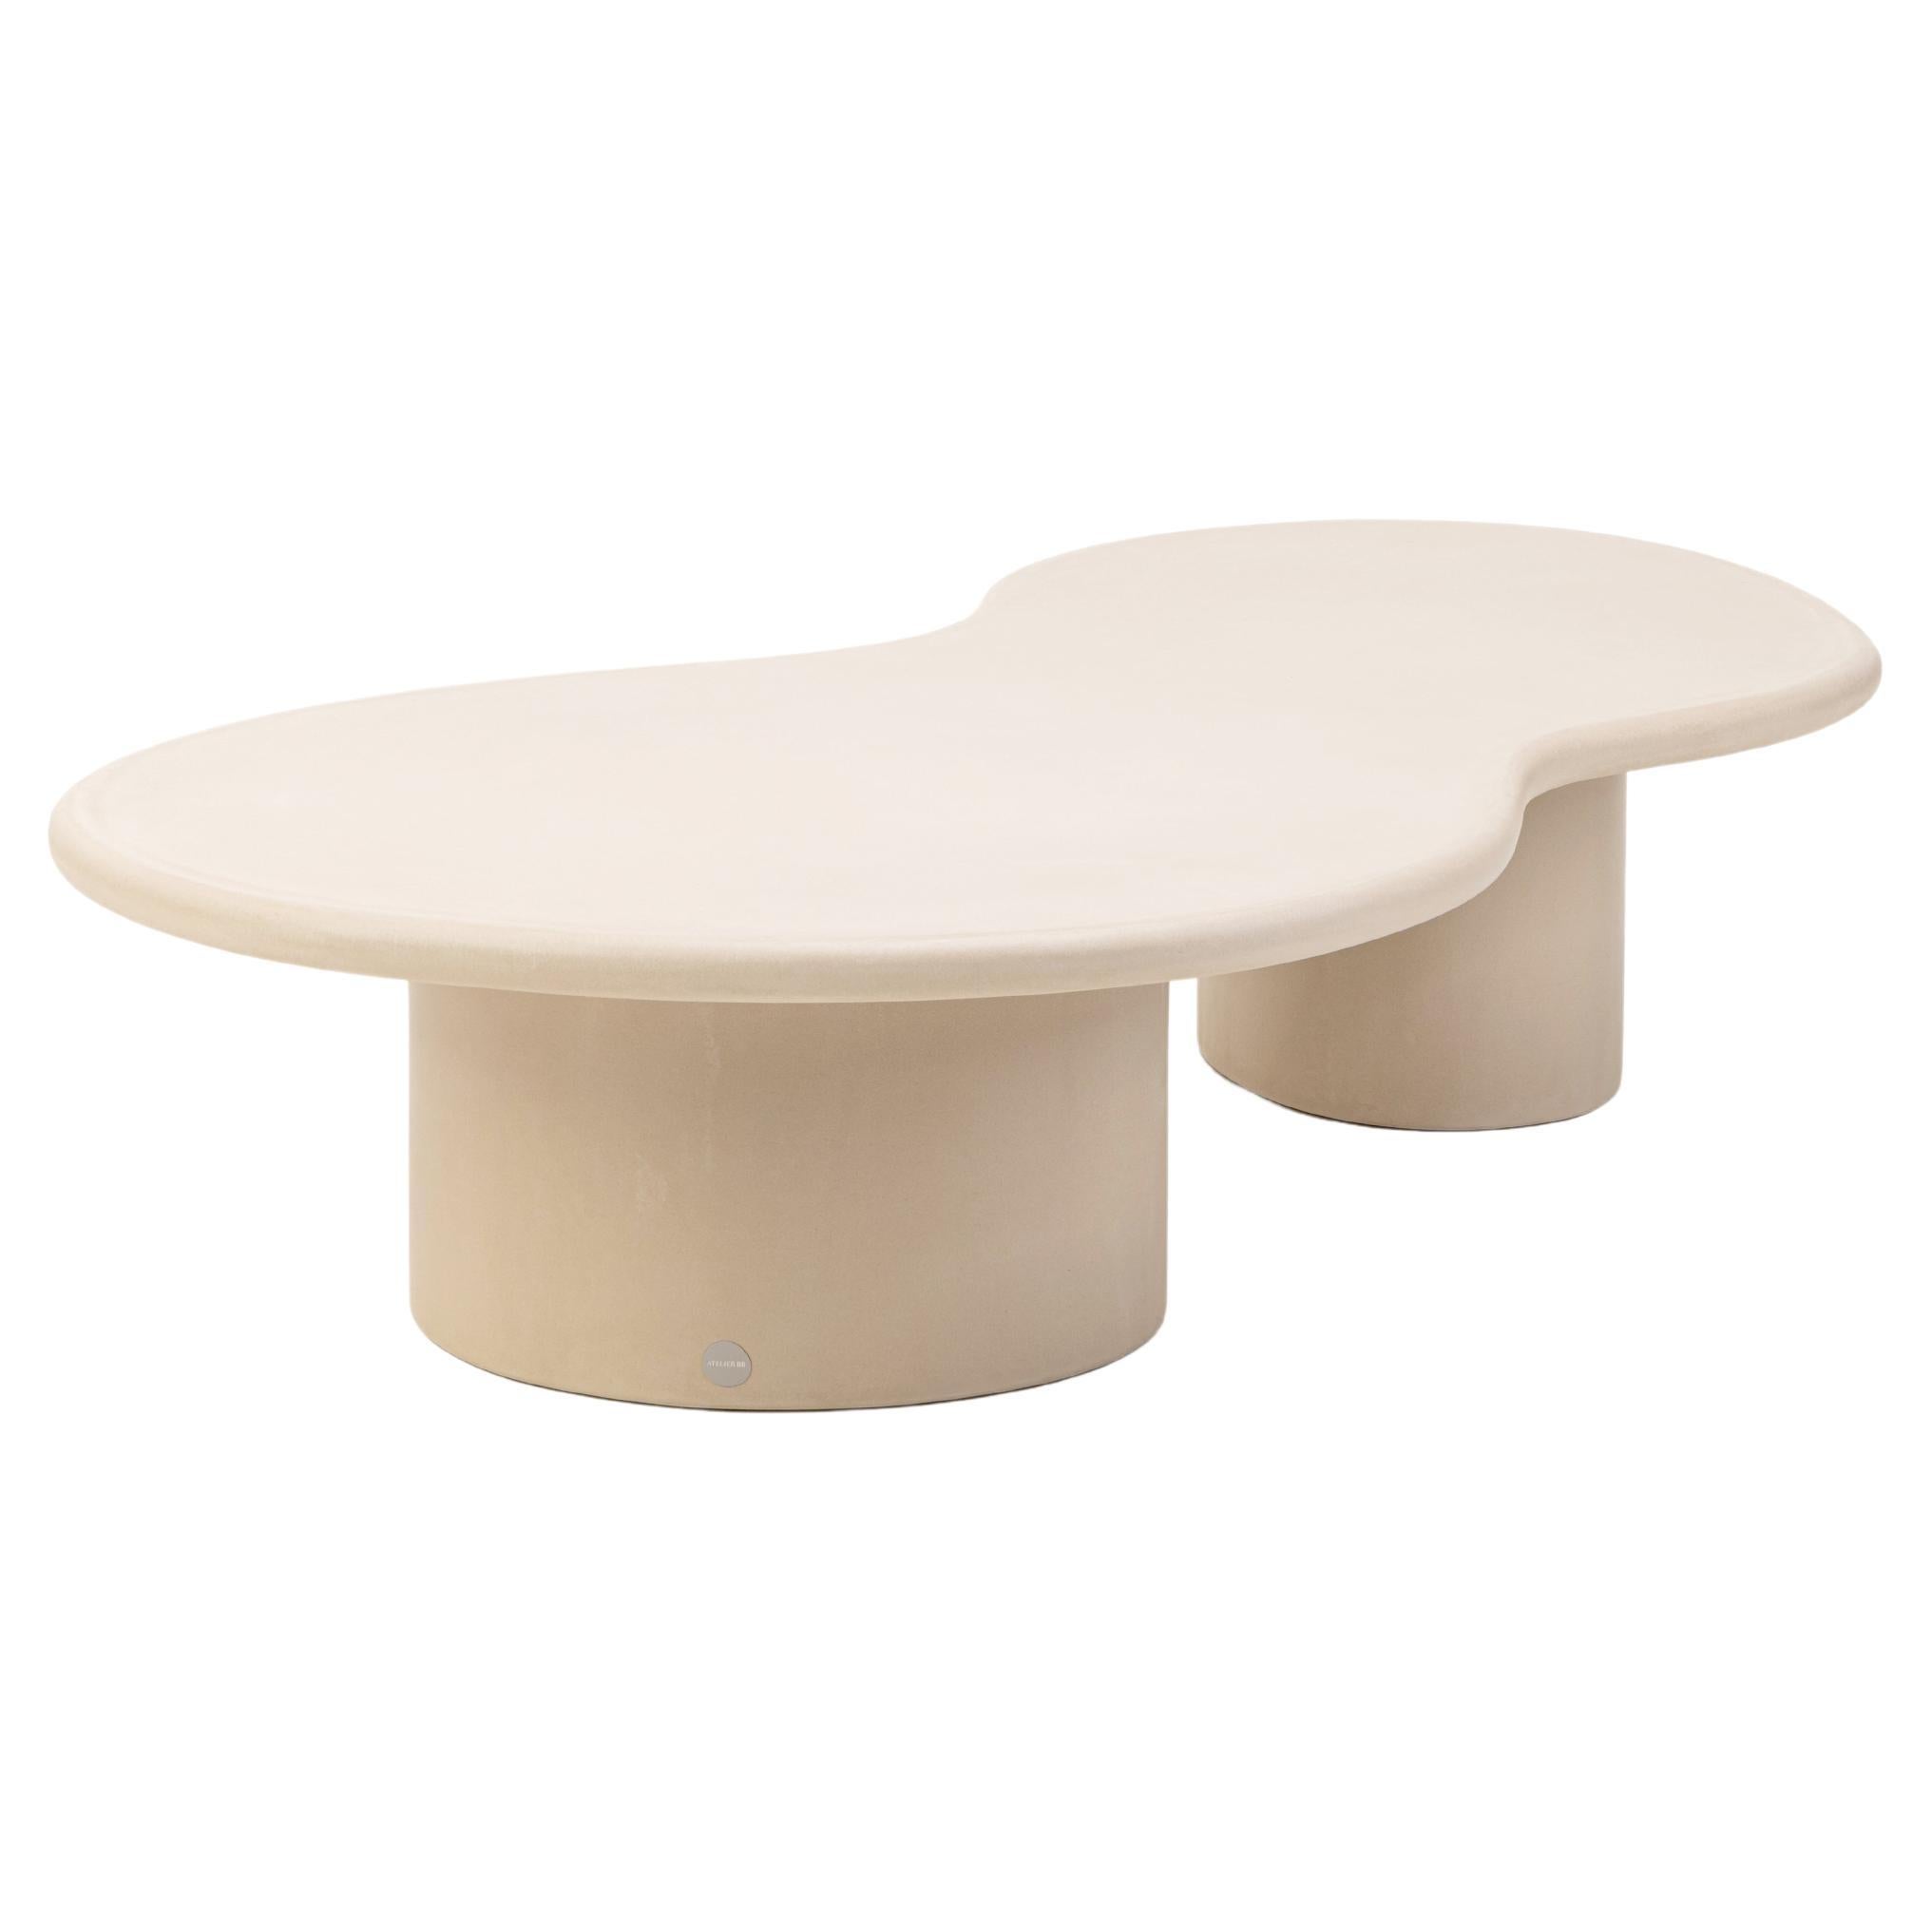 Organic Shaped Natural Plaster Coffee Table "Ovum" by Isabelle Beaumont